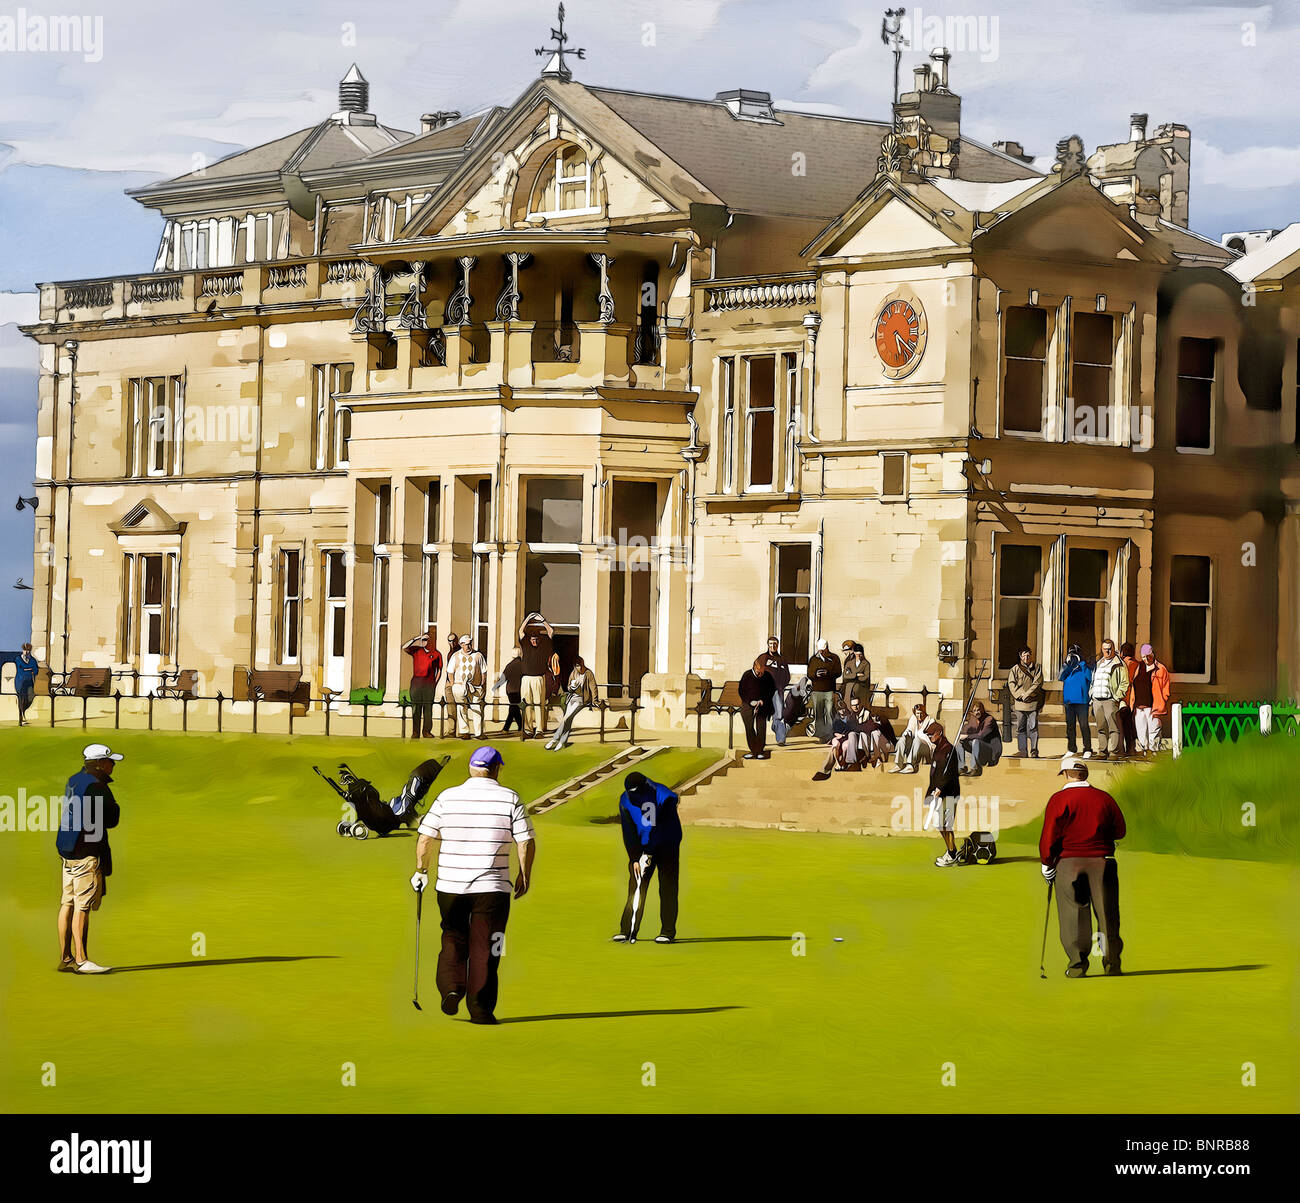 illustration of the 18th green and Clubhouse on the Old Course at the Royal and Ancient Golf Club, St Andrews, Fife, Scotland. Stock Photo